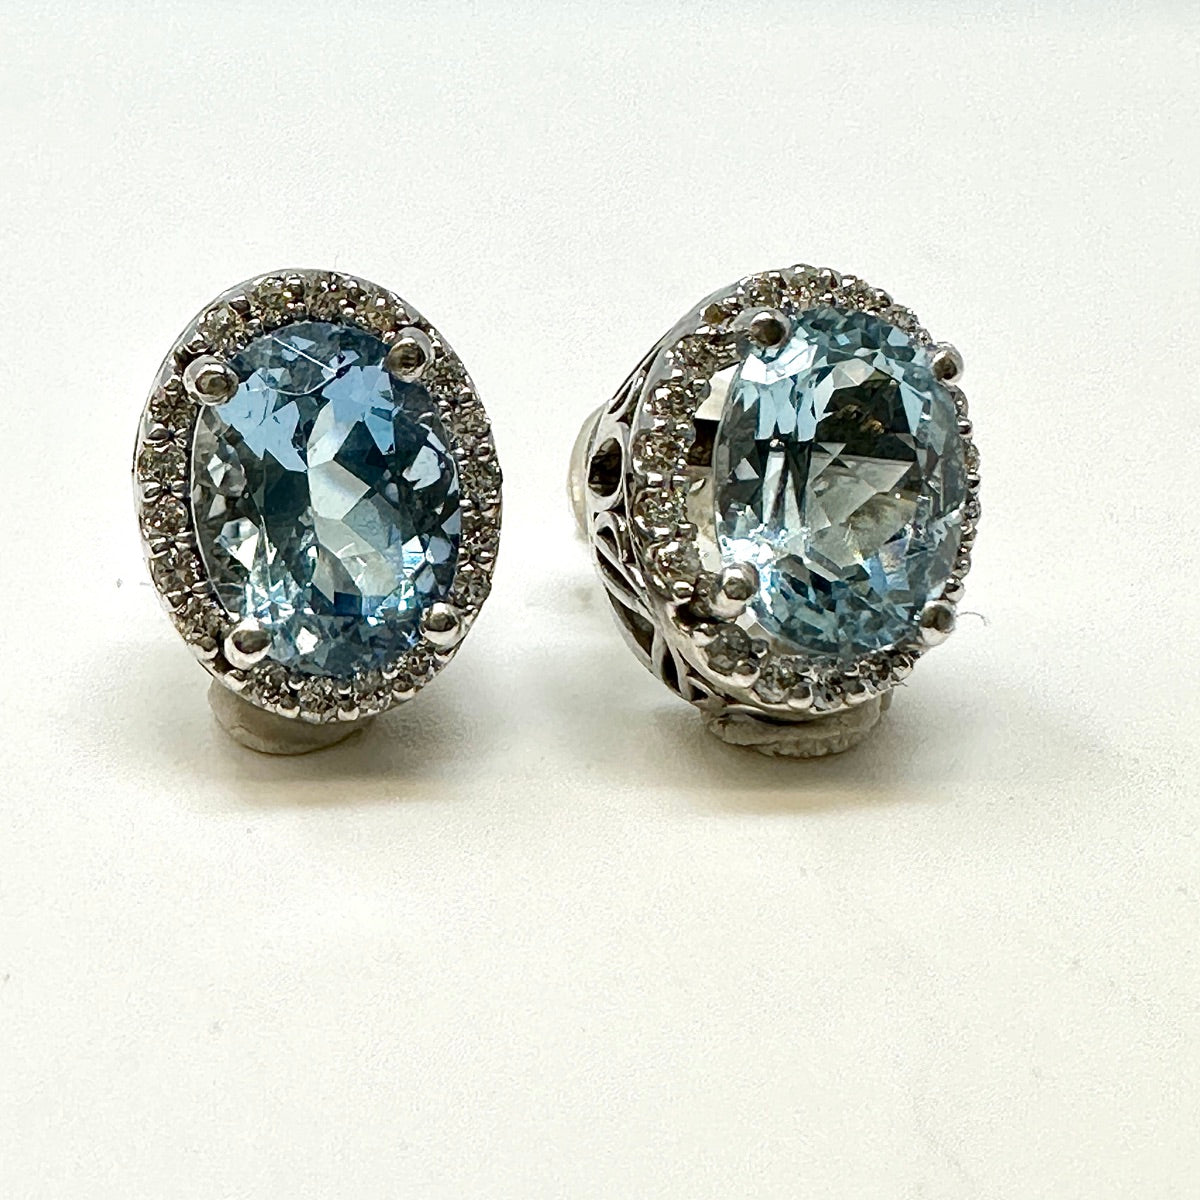 Sydel & Sydel 14K White Gold Earrings with Aquamarine and Diamond Halo